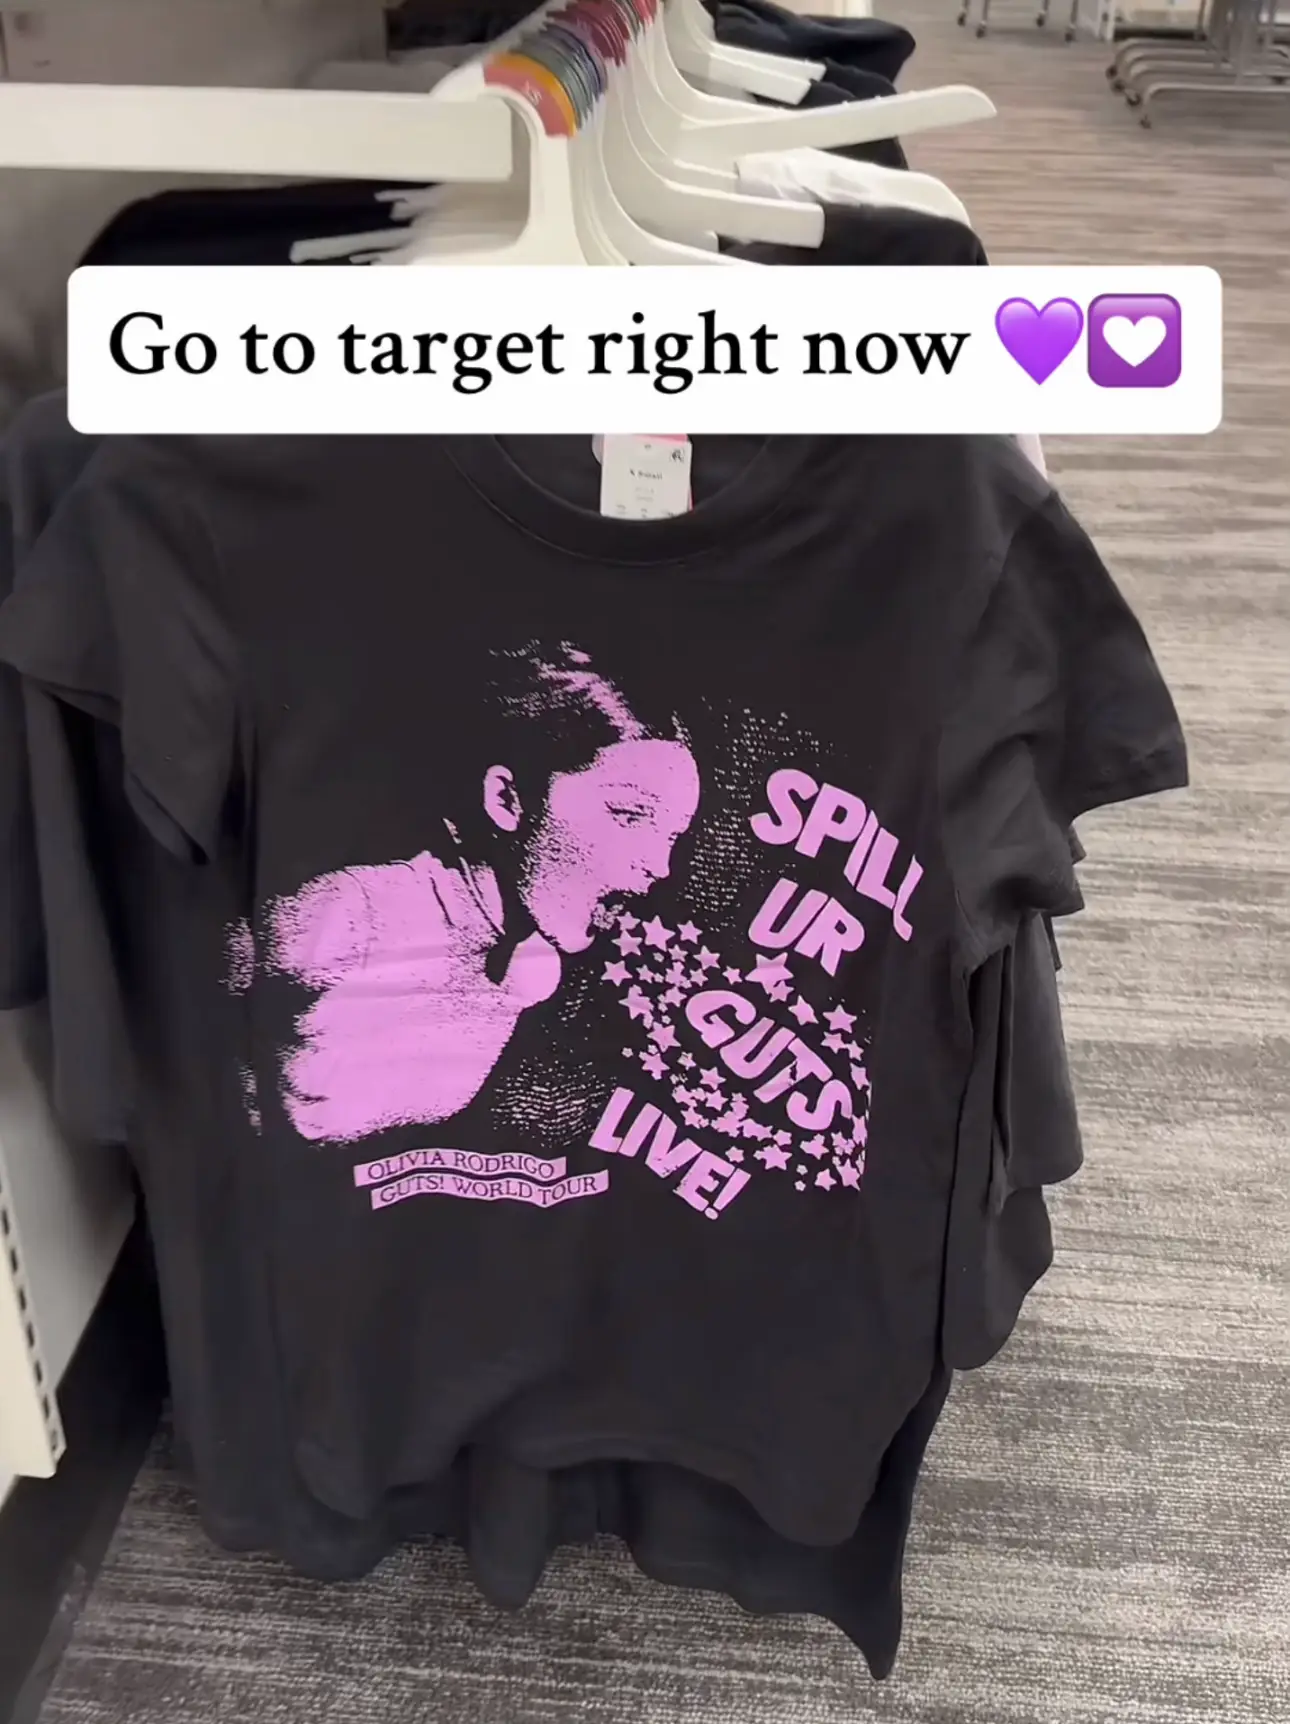 The Olivia Rodrigo Target Merch Starts at $12, So Yeah, You Can Shop It All  – StyleCaster